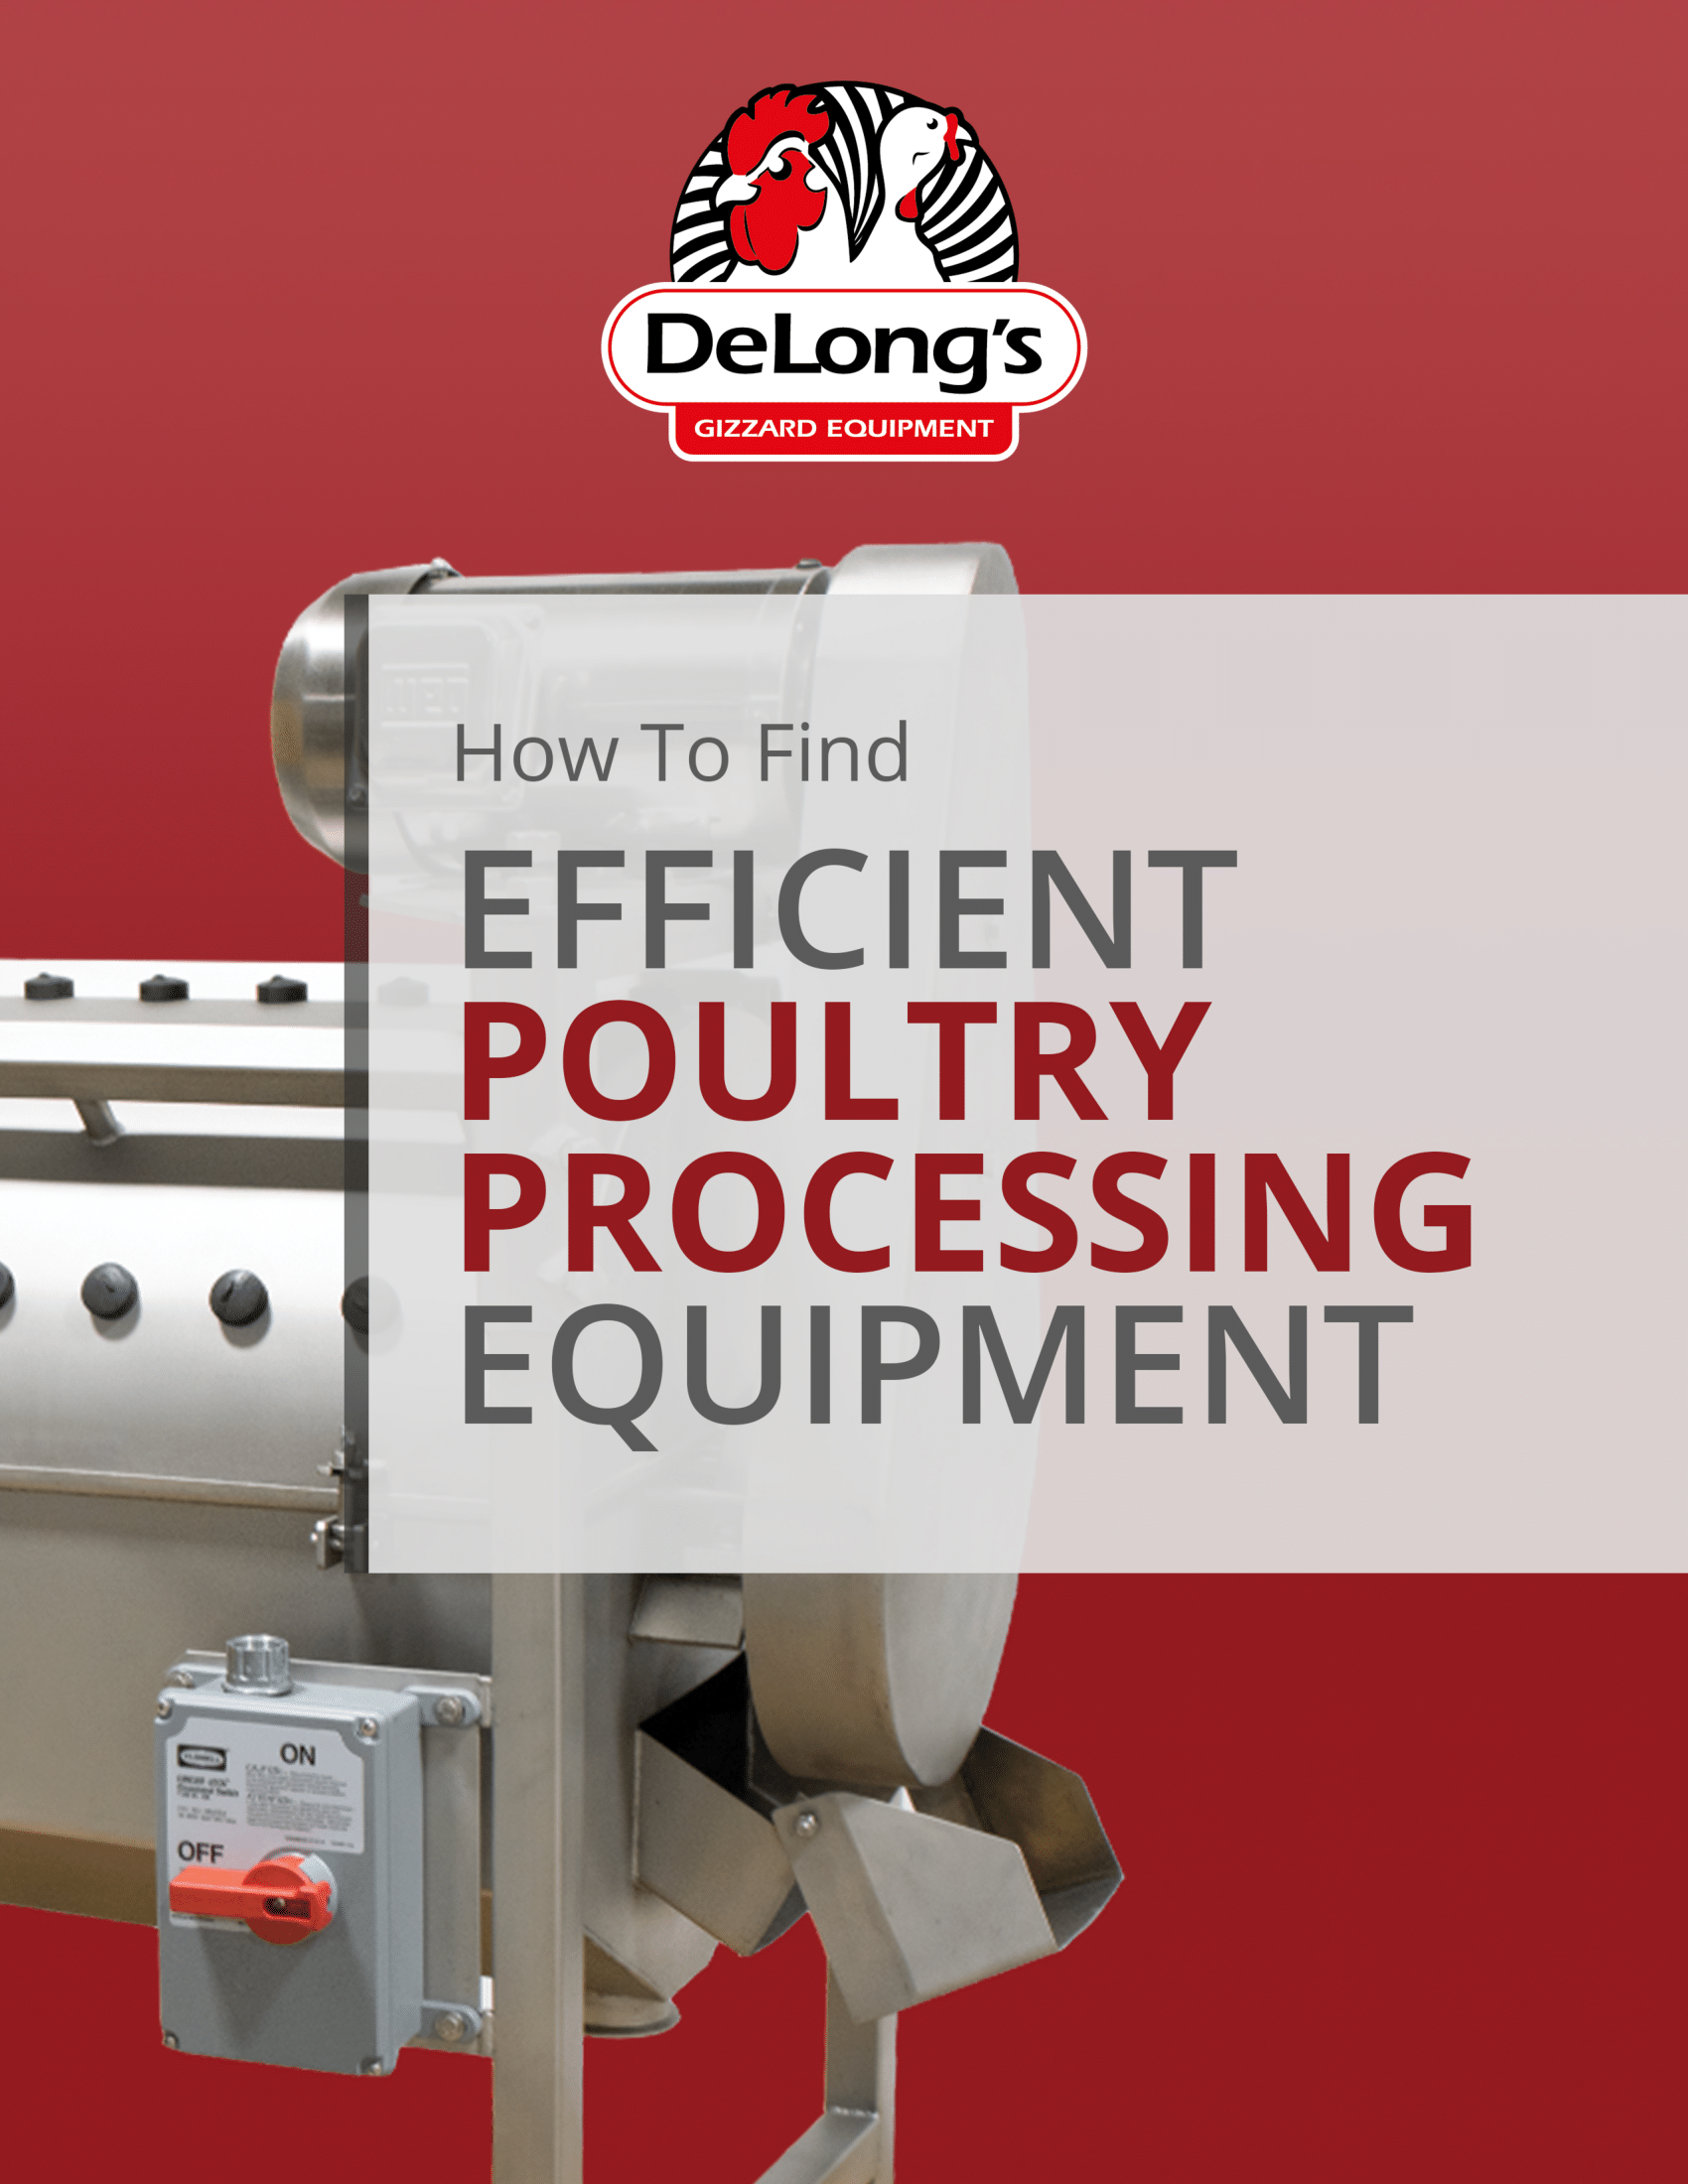 DeLong's How To Find Efficient Poultry Processing Equipment